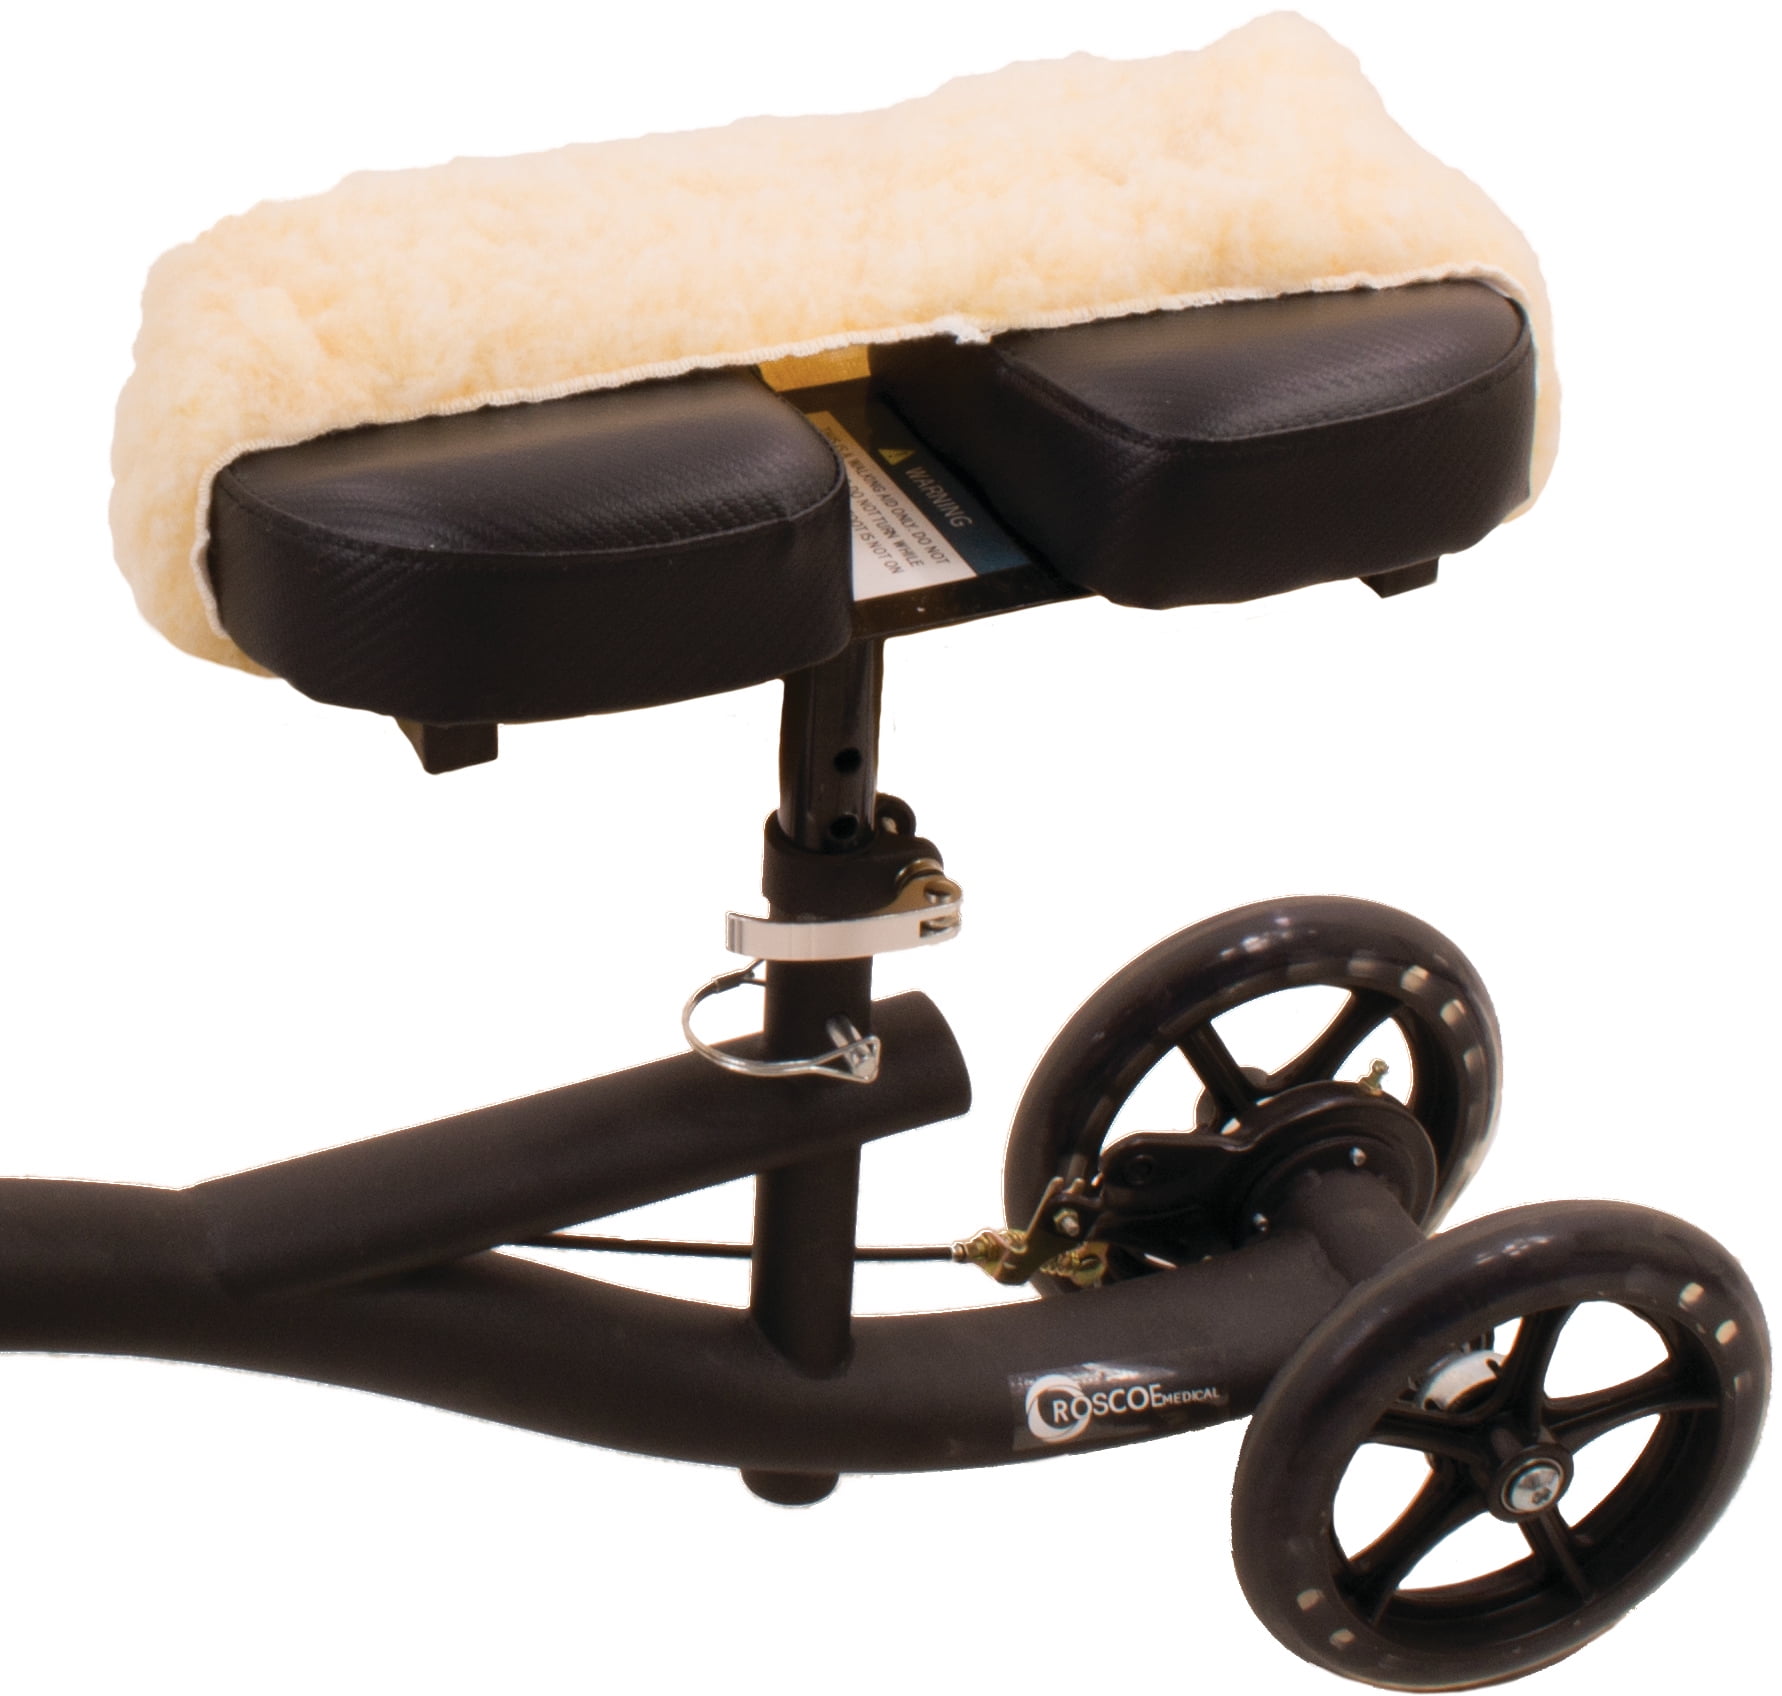 Knee Scooter Memory Foam by Tkwc Inc - Two inch Thick Memory Foam Knee Pad and Cover - Fits Most Knee Walker Models